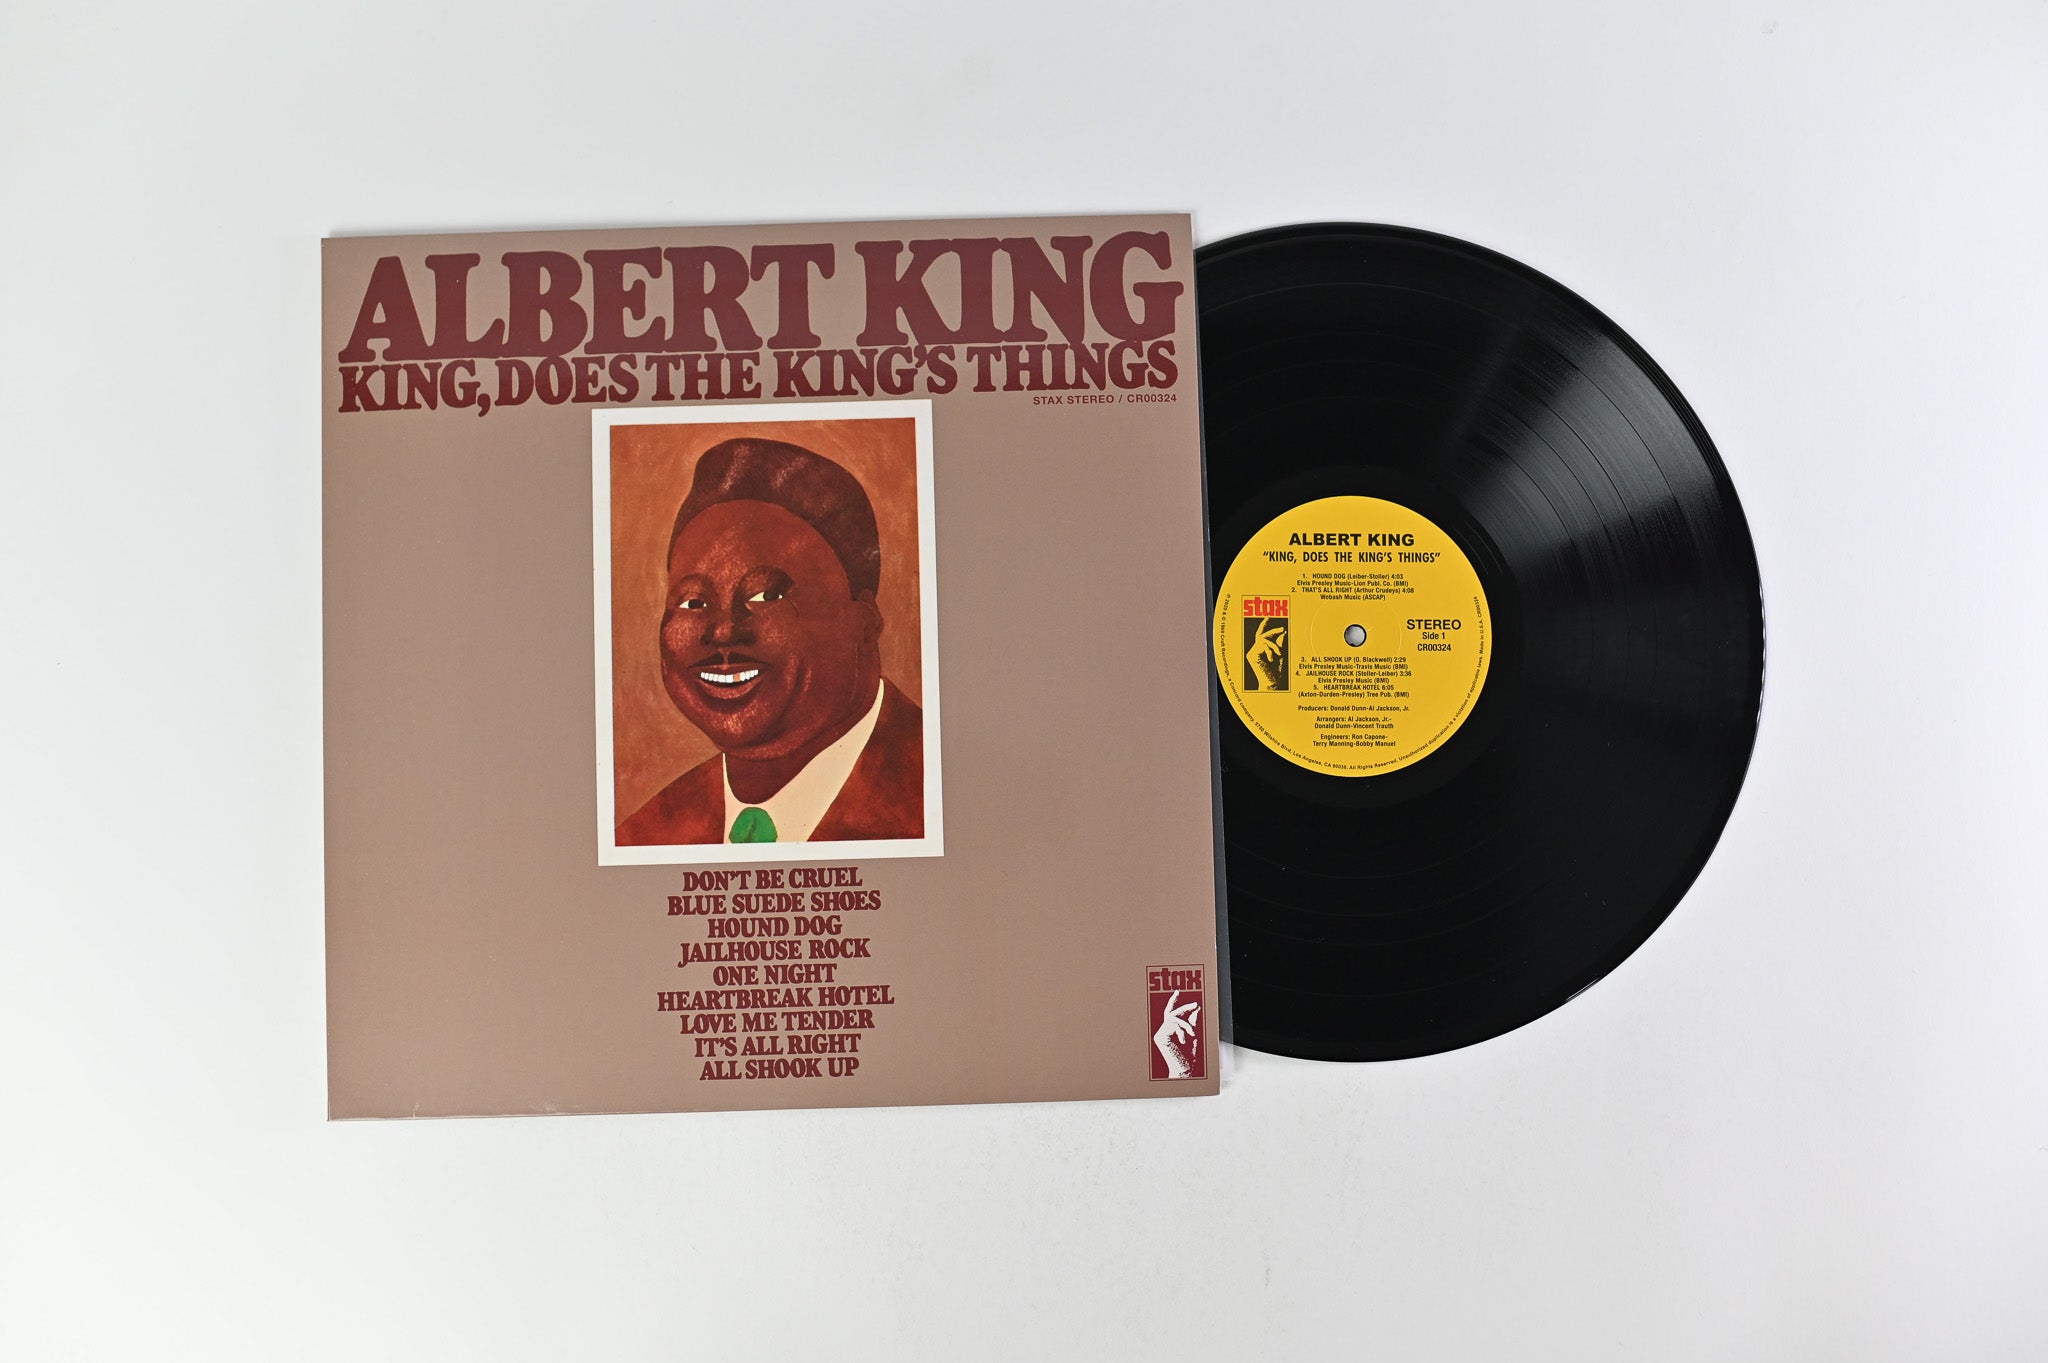 Albert King - King, Does The King's Things on Stax - Vinyl Me, Please